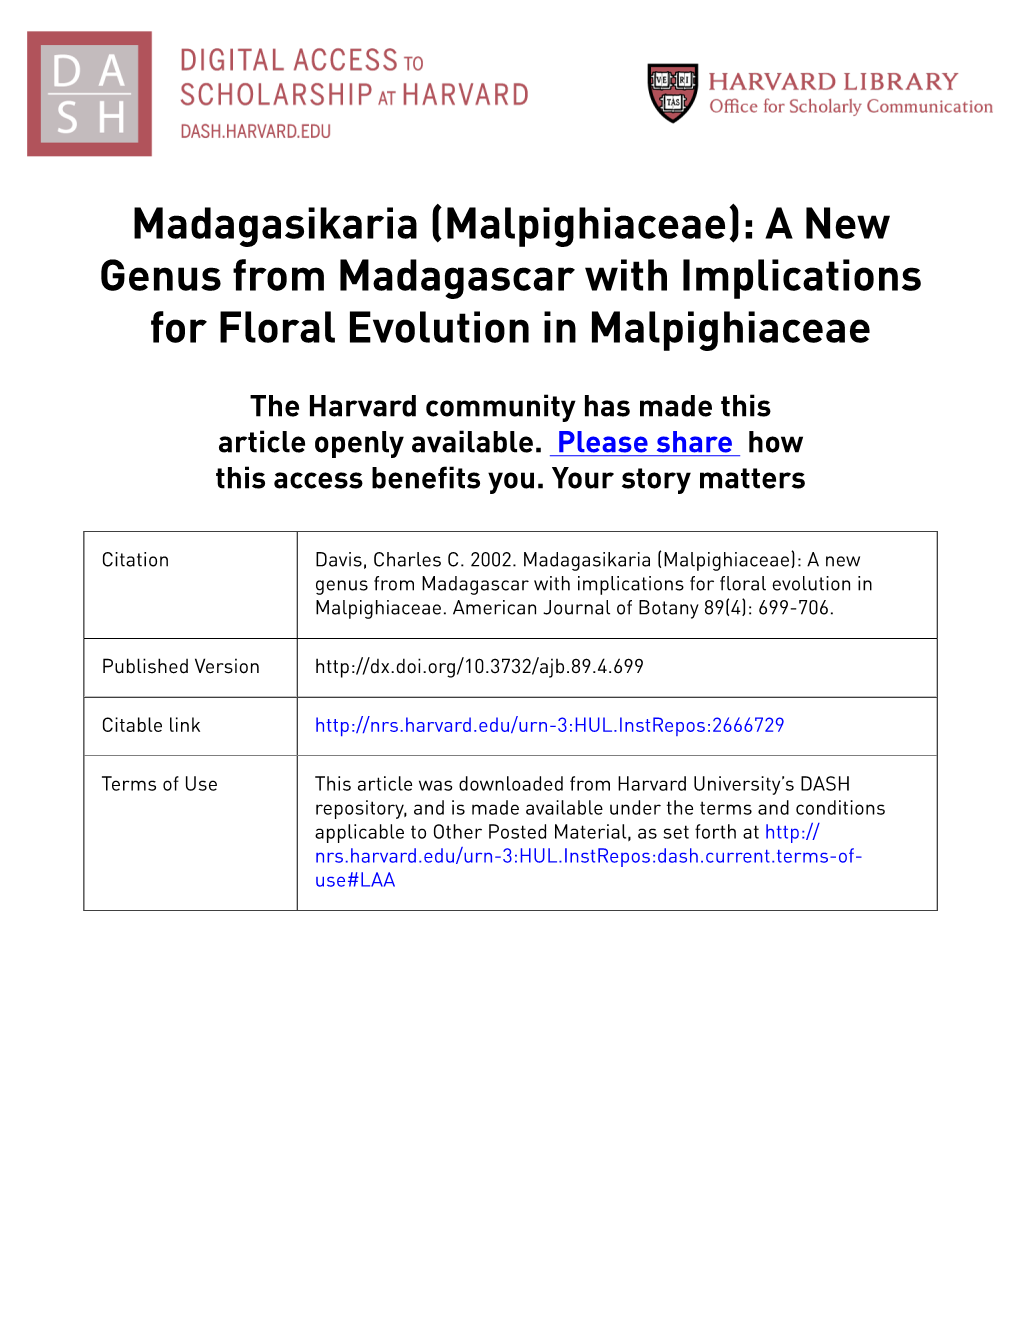 Malpighiaceae): a New Genus from Madagascar with Implications for Floral Evolution in Malpighiaceae